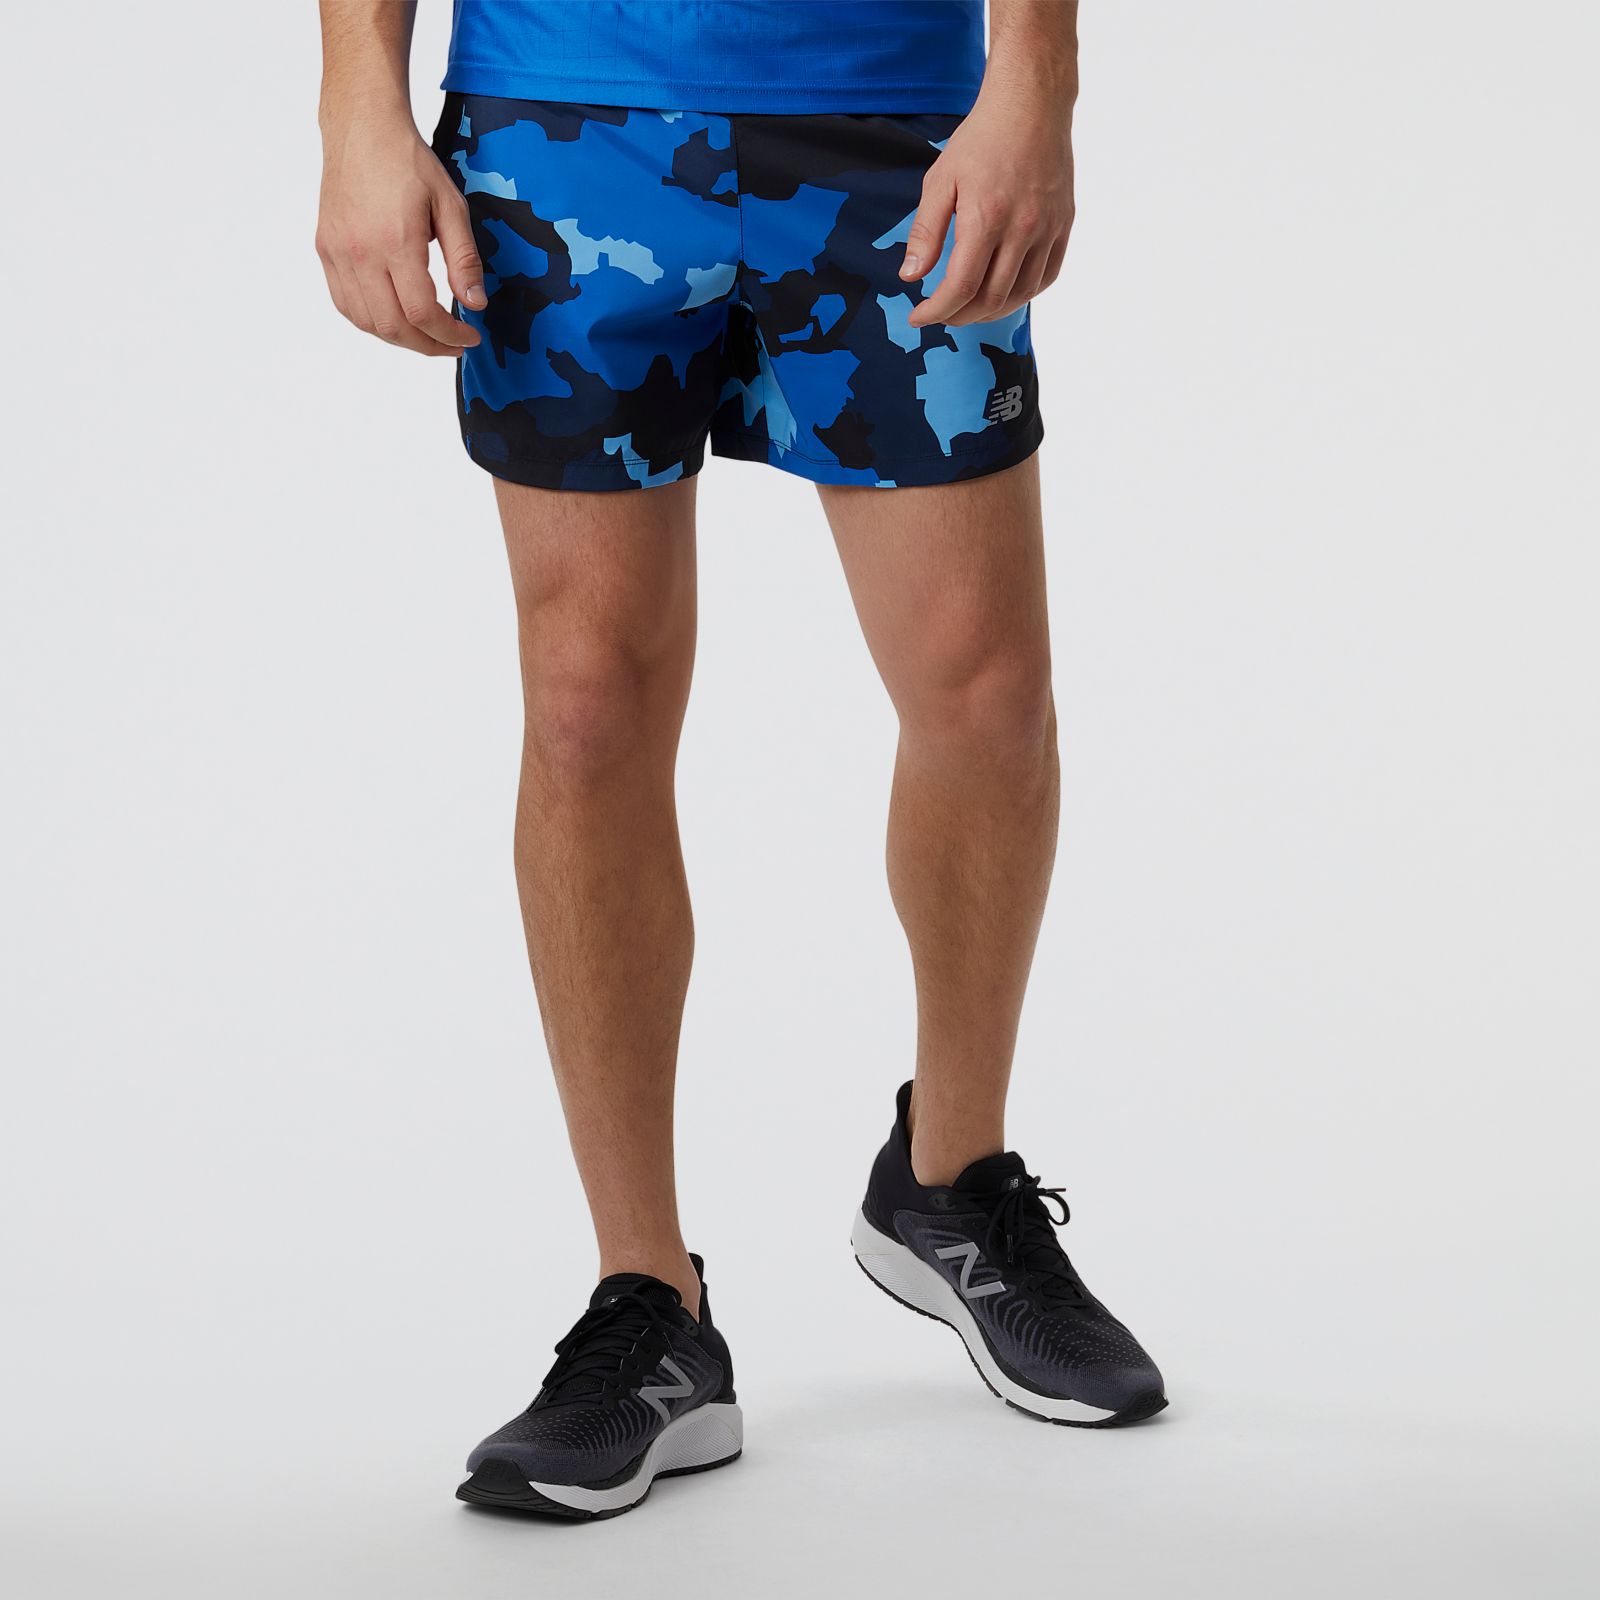 New Balance Short Printed Accelerate MS23229, Blue, swatch